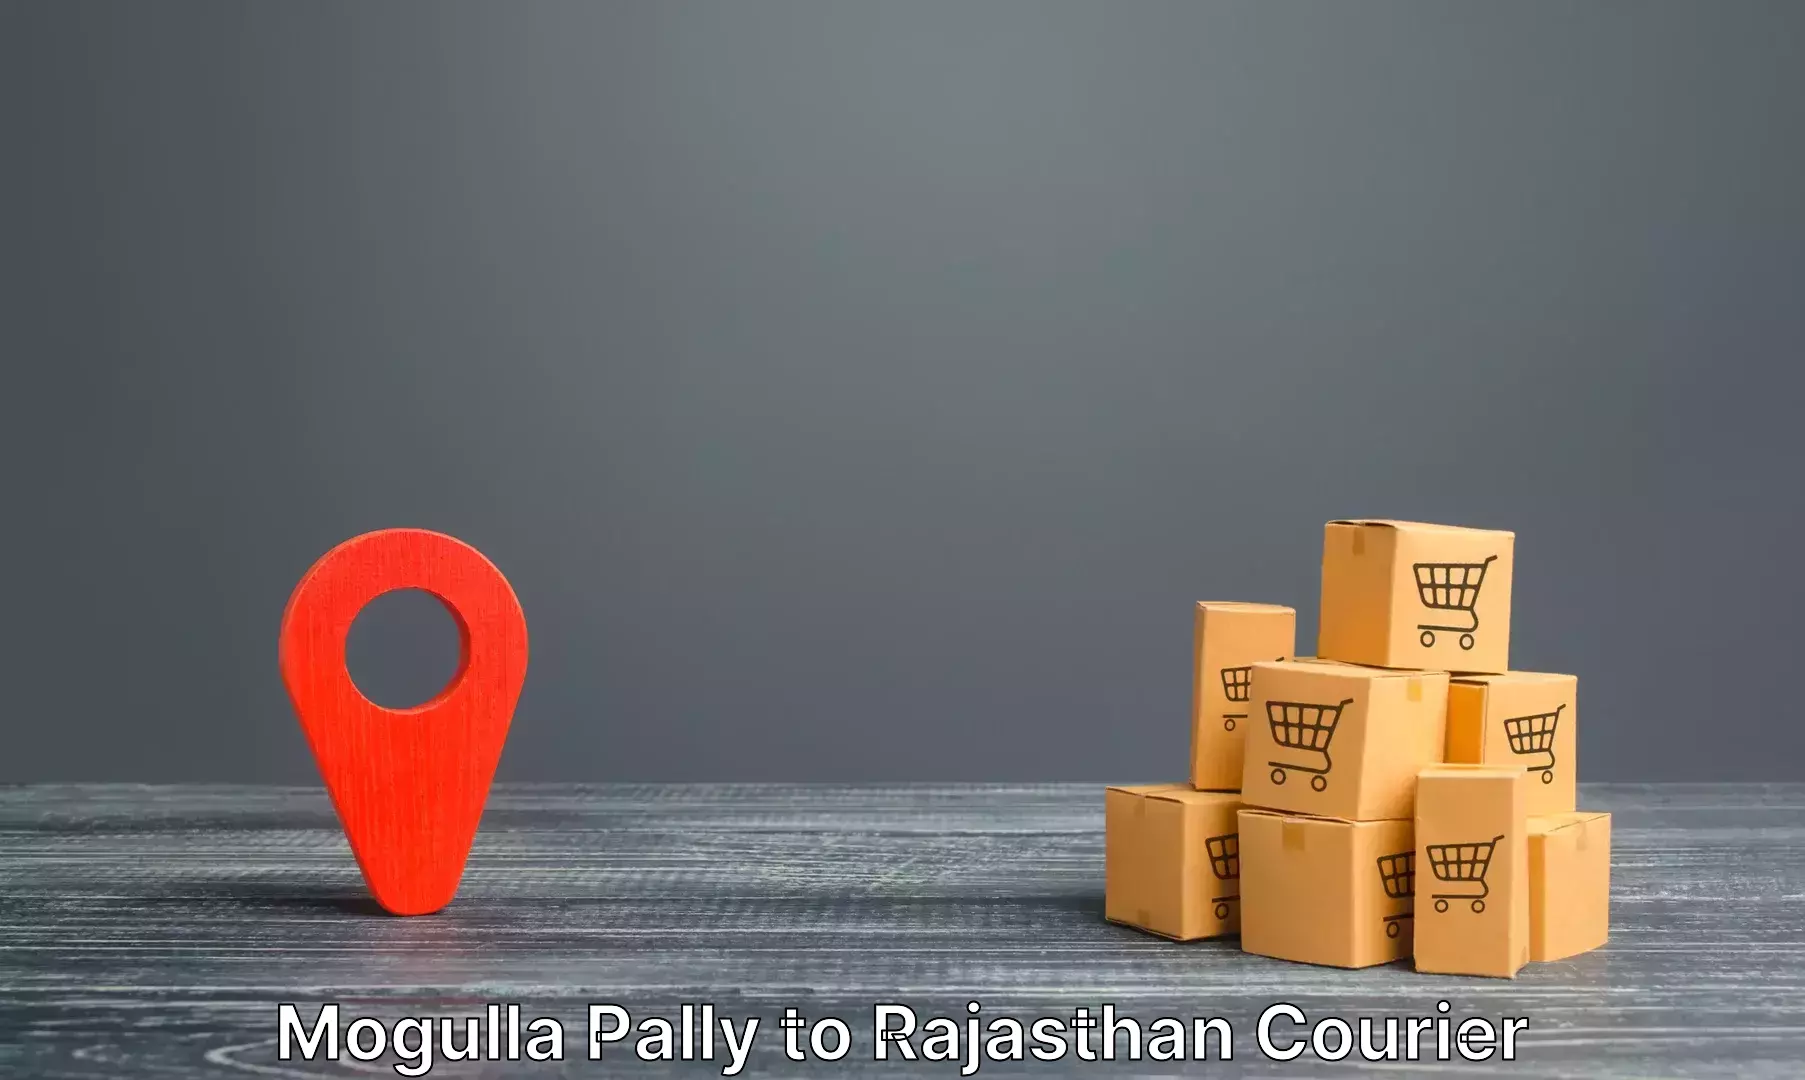 Luggage transport consulting Mogulla Pally to Dholpur